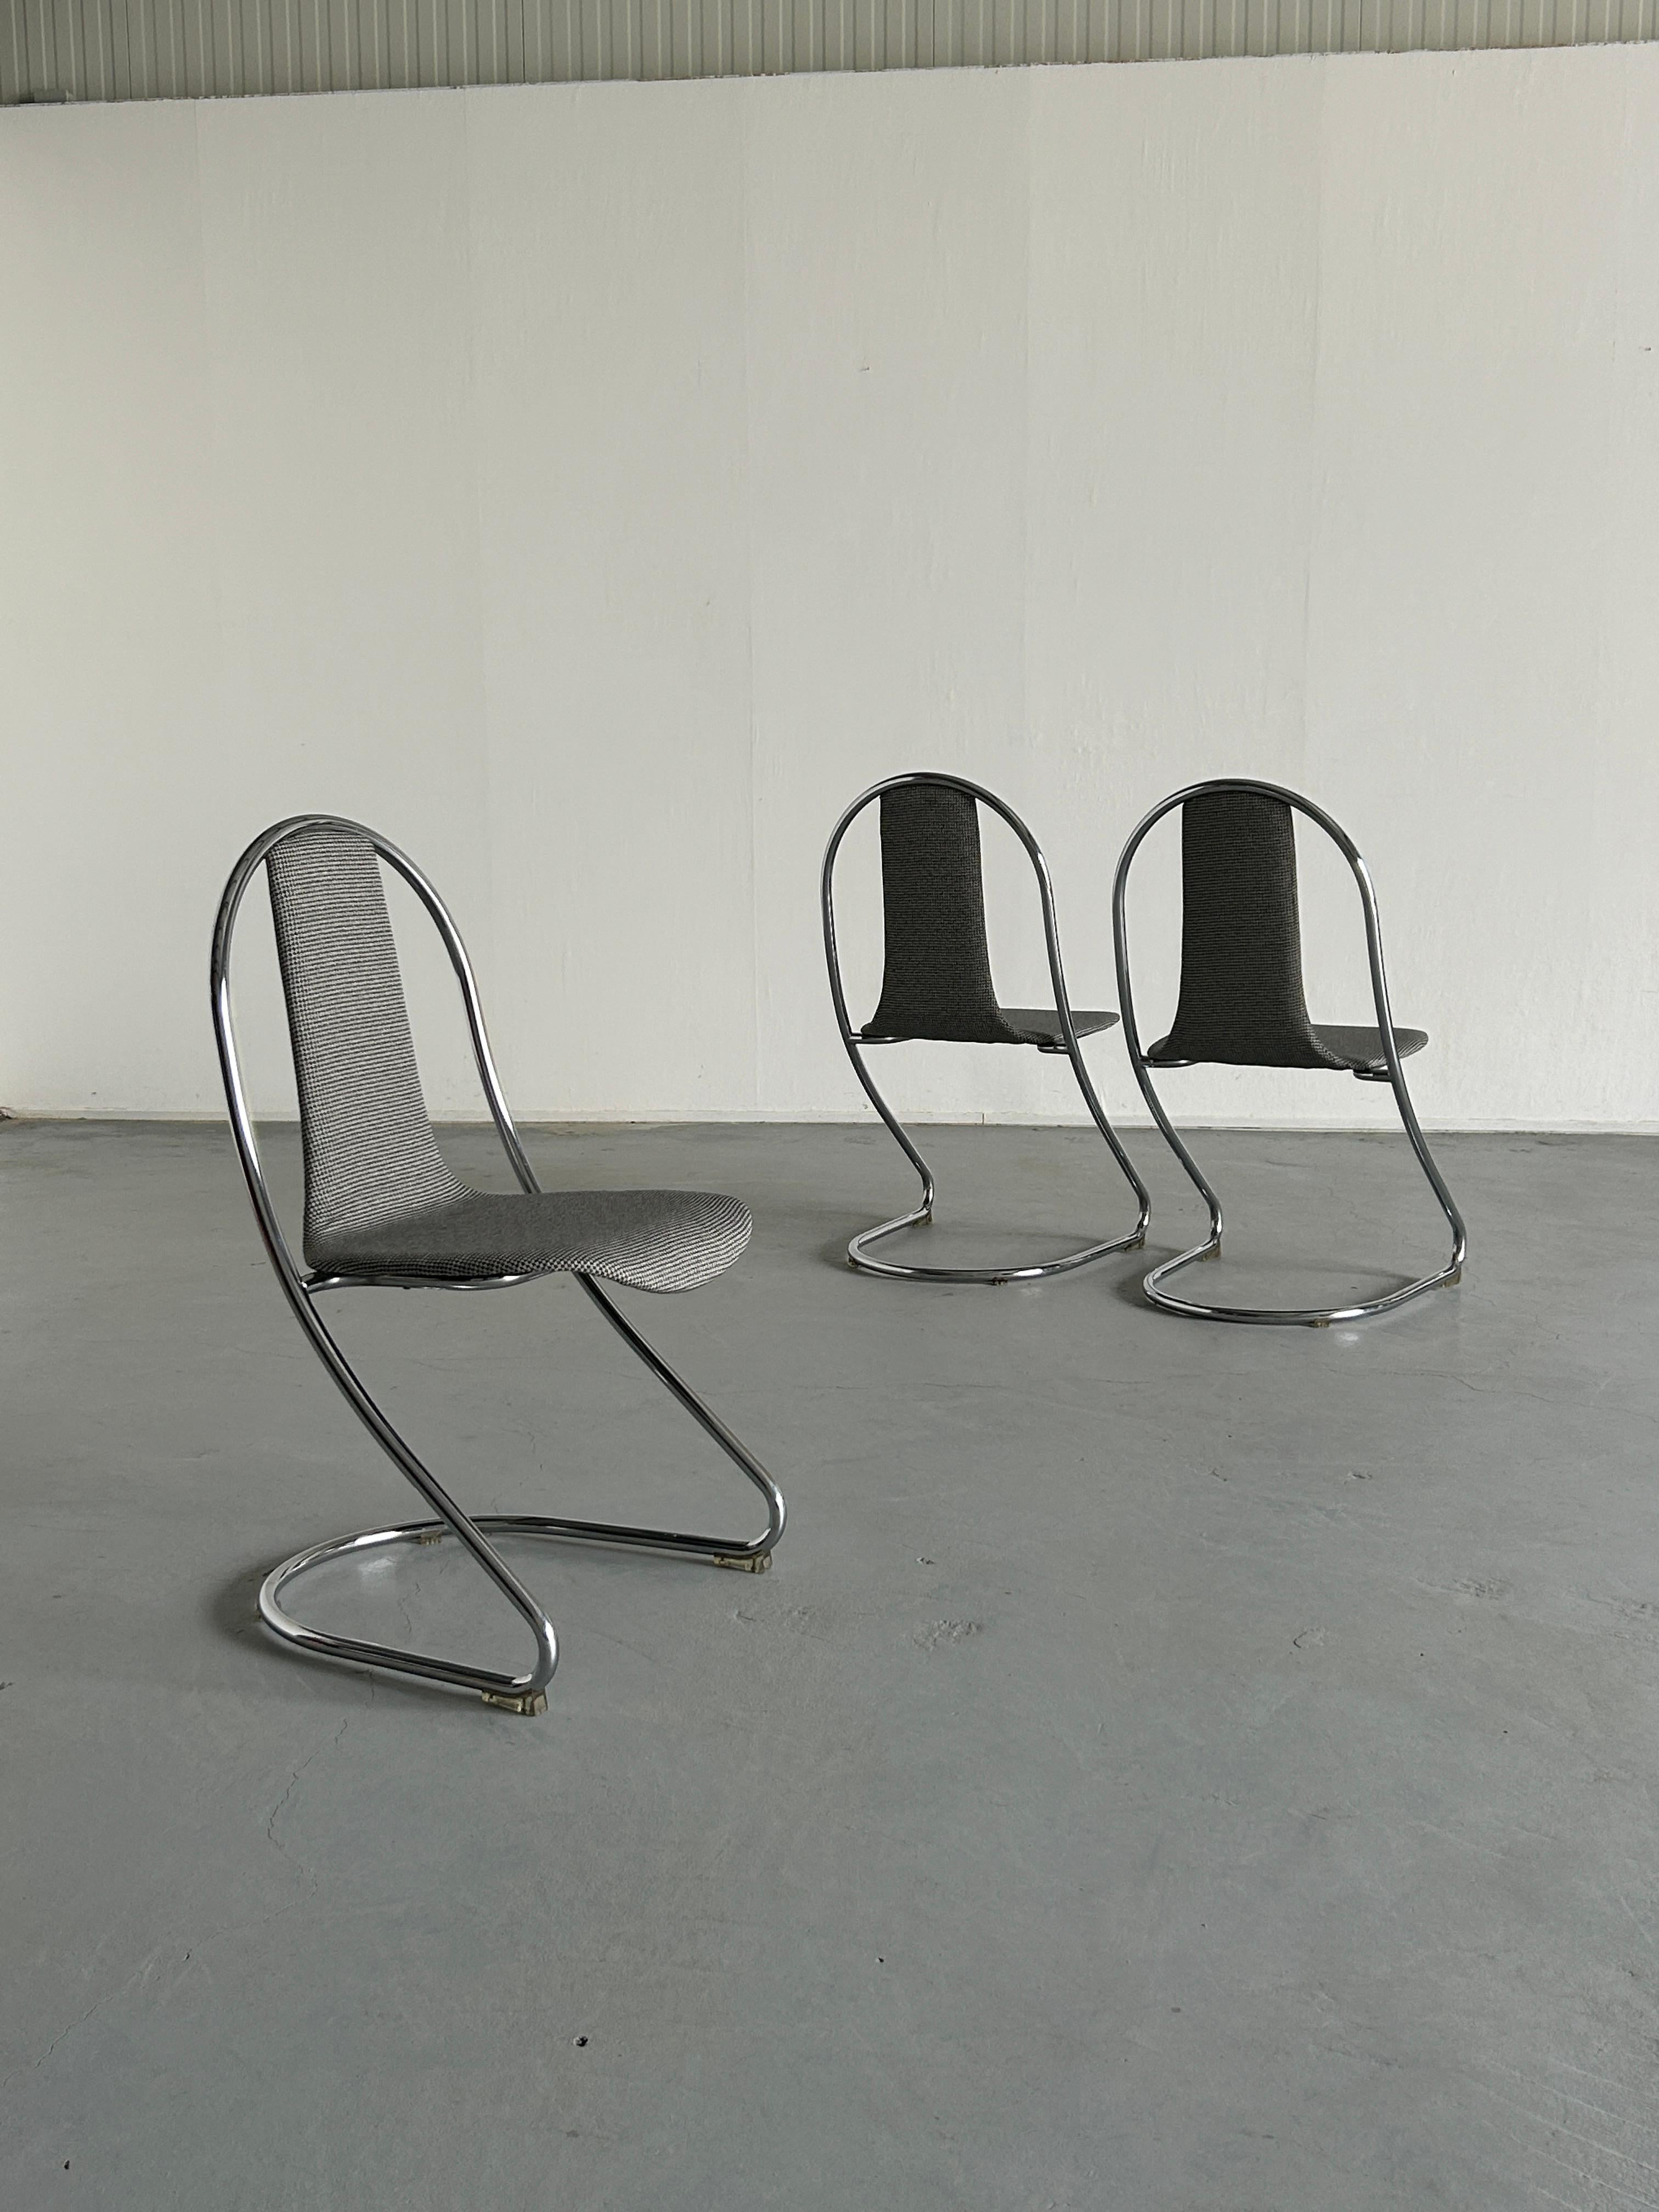 Three Italian Space Age cantilever chairs, tubular chrome steel, one-piece upholstered seat and backrest.
Transparent plastic floor gliders
Unknown Italian production of the late 1980s.
Reupholstered in new Italian grey fabric.

Well preserved with